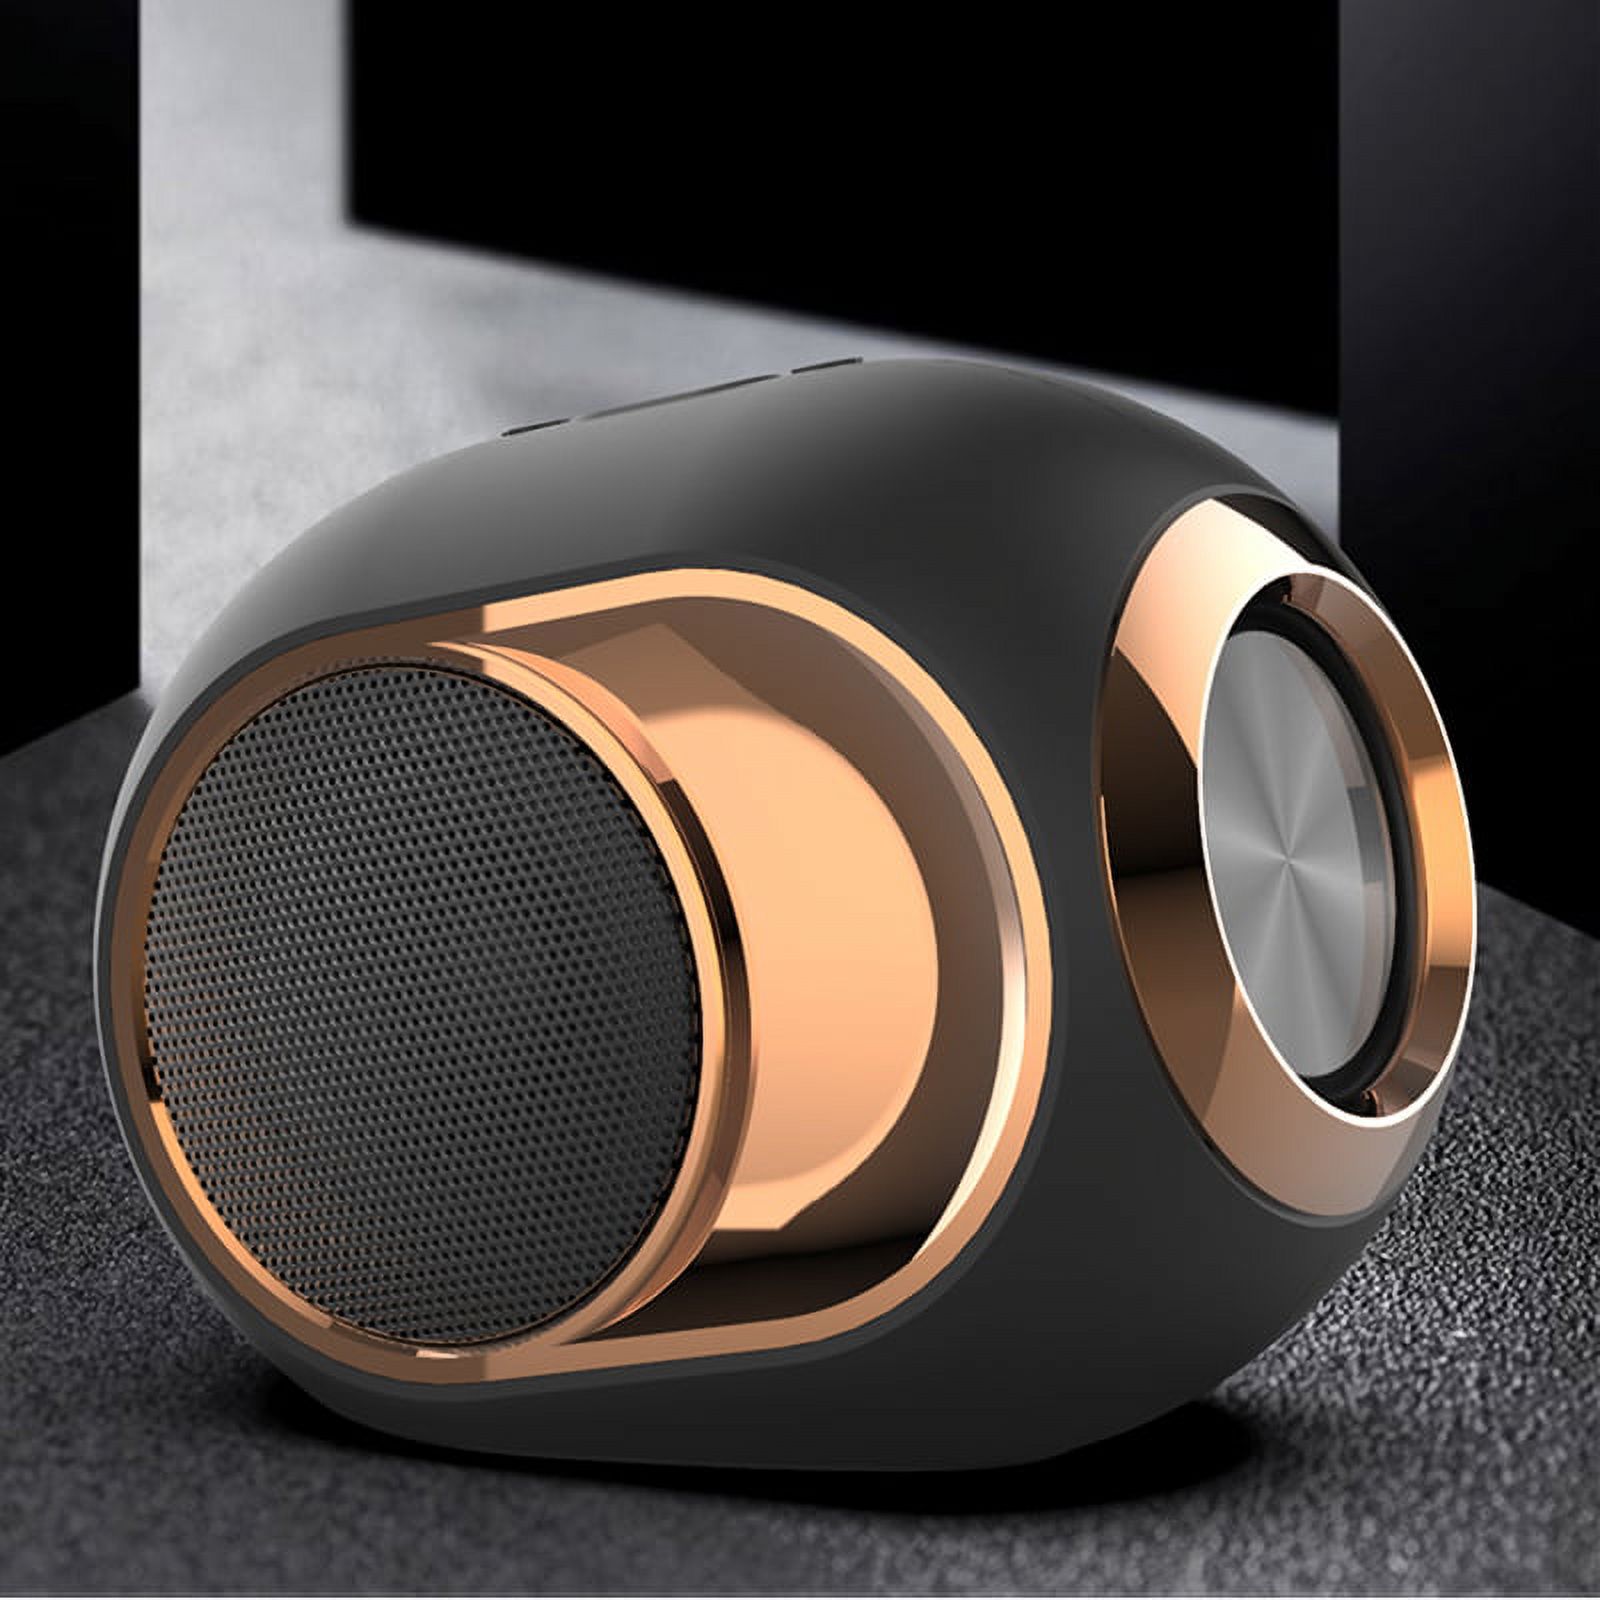 High-End Wireless Speaker Bluetooth Speaker Subwoofer Stereo Support TF Card USB Flash Drive - image 4 of 5